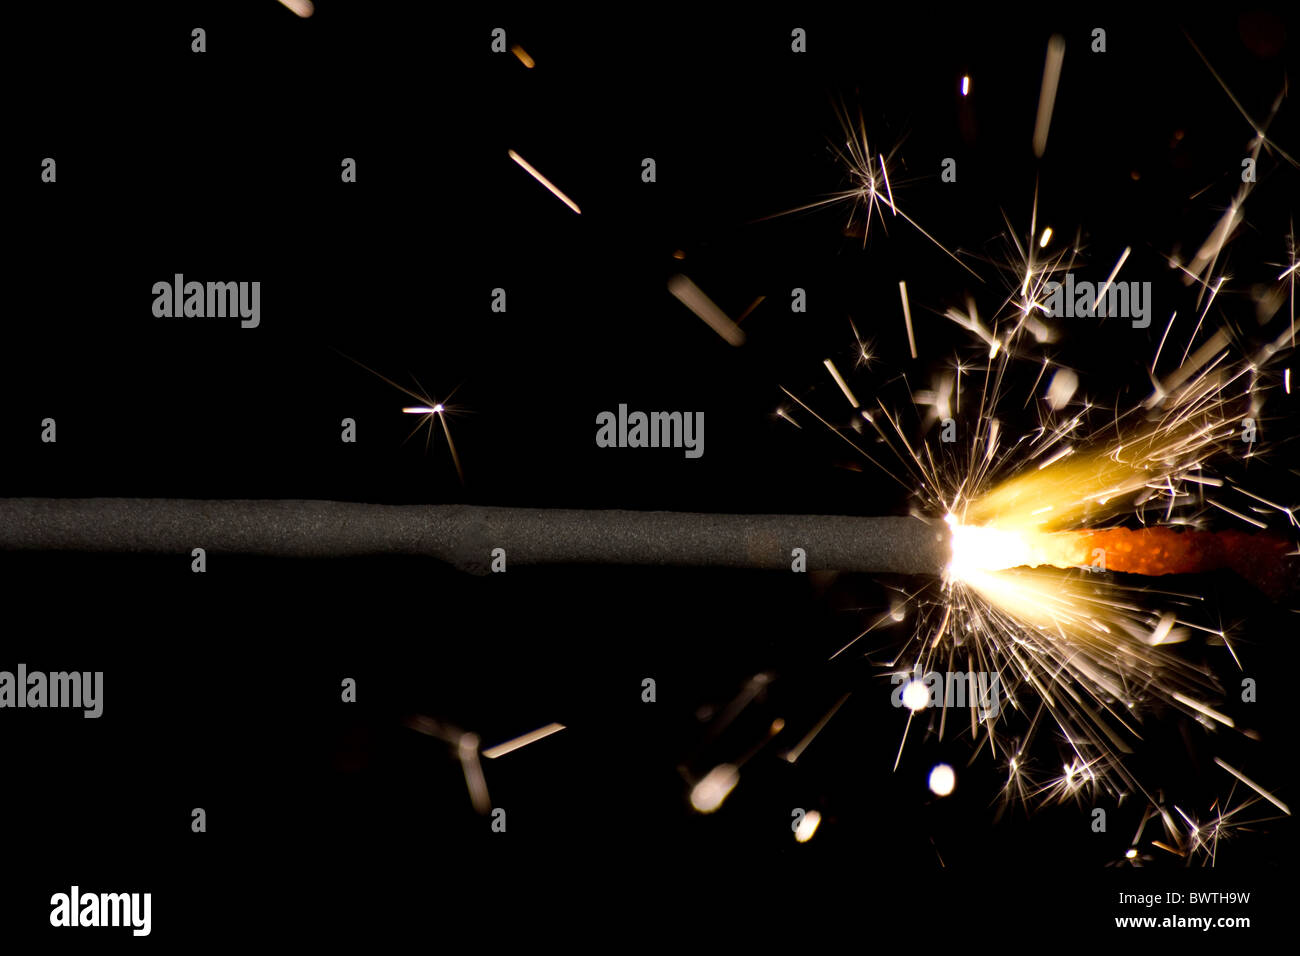 The picture shows a sparkler on black background . Stock Photo